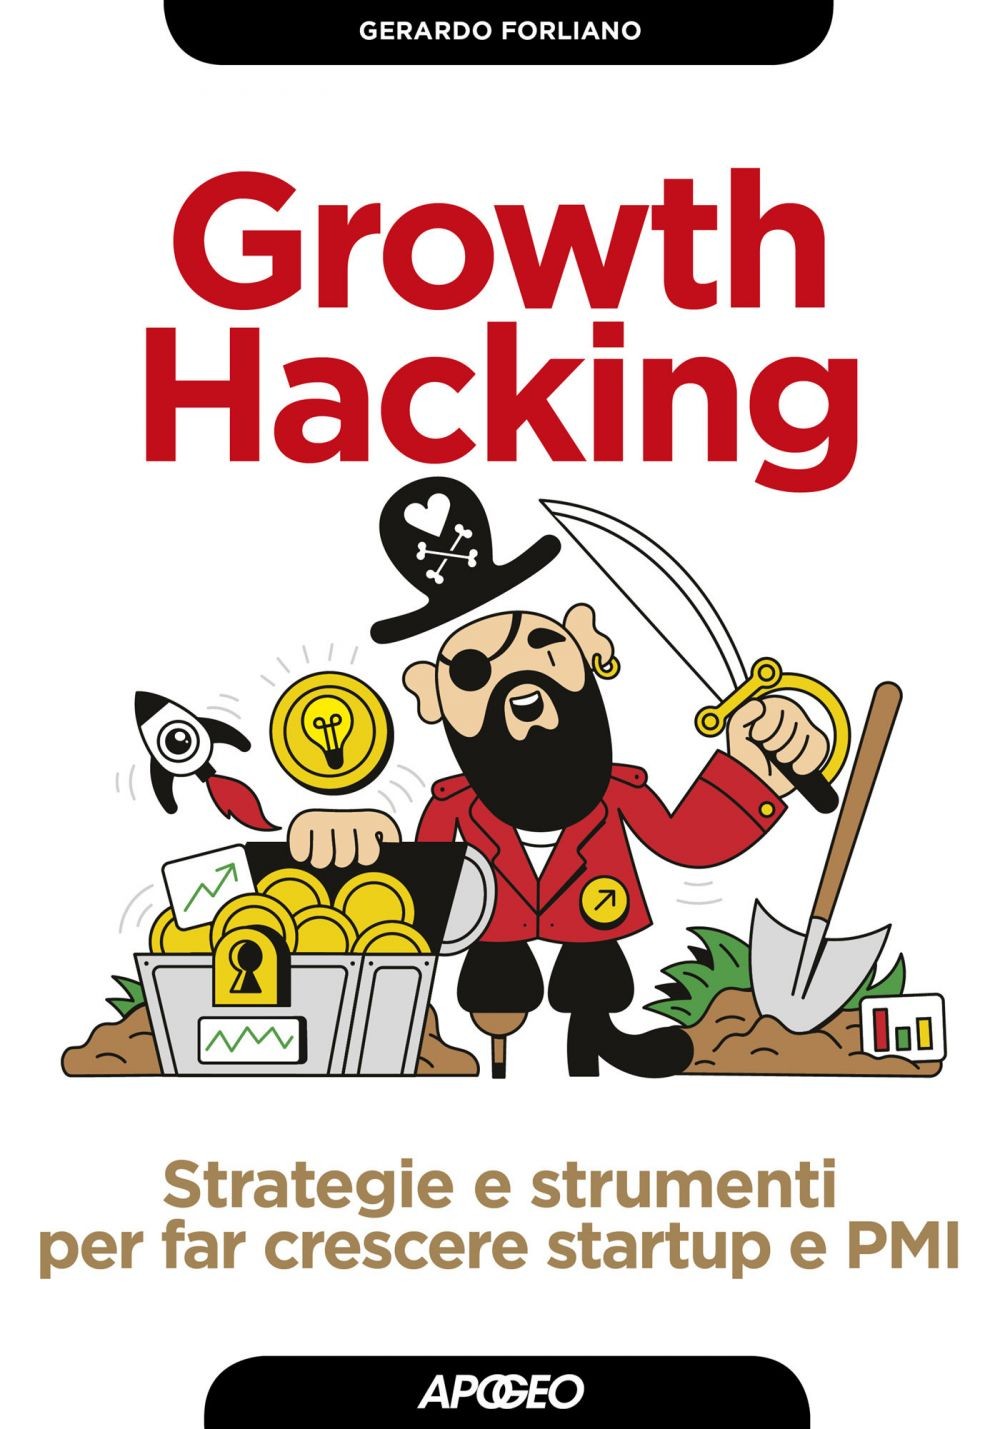 Growth Hacking - Librerie.coop